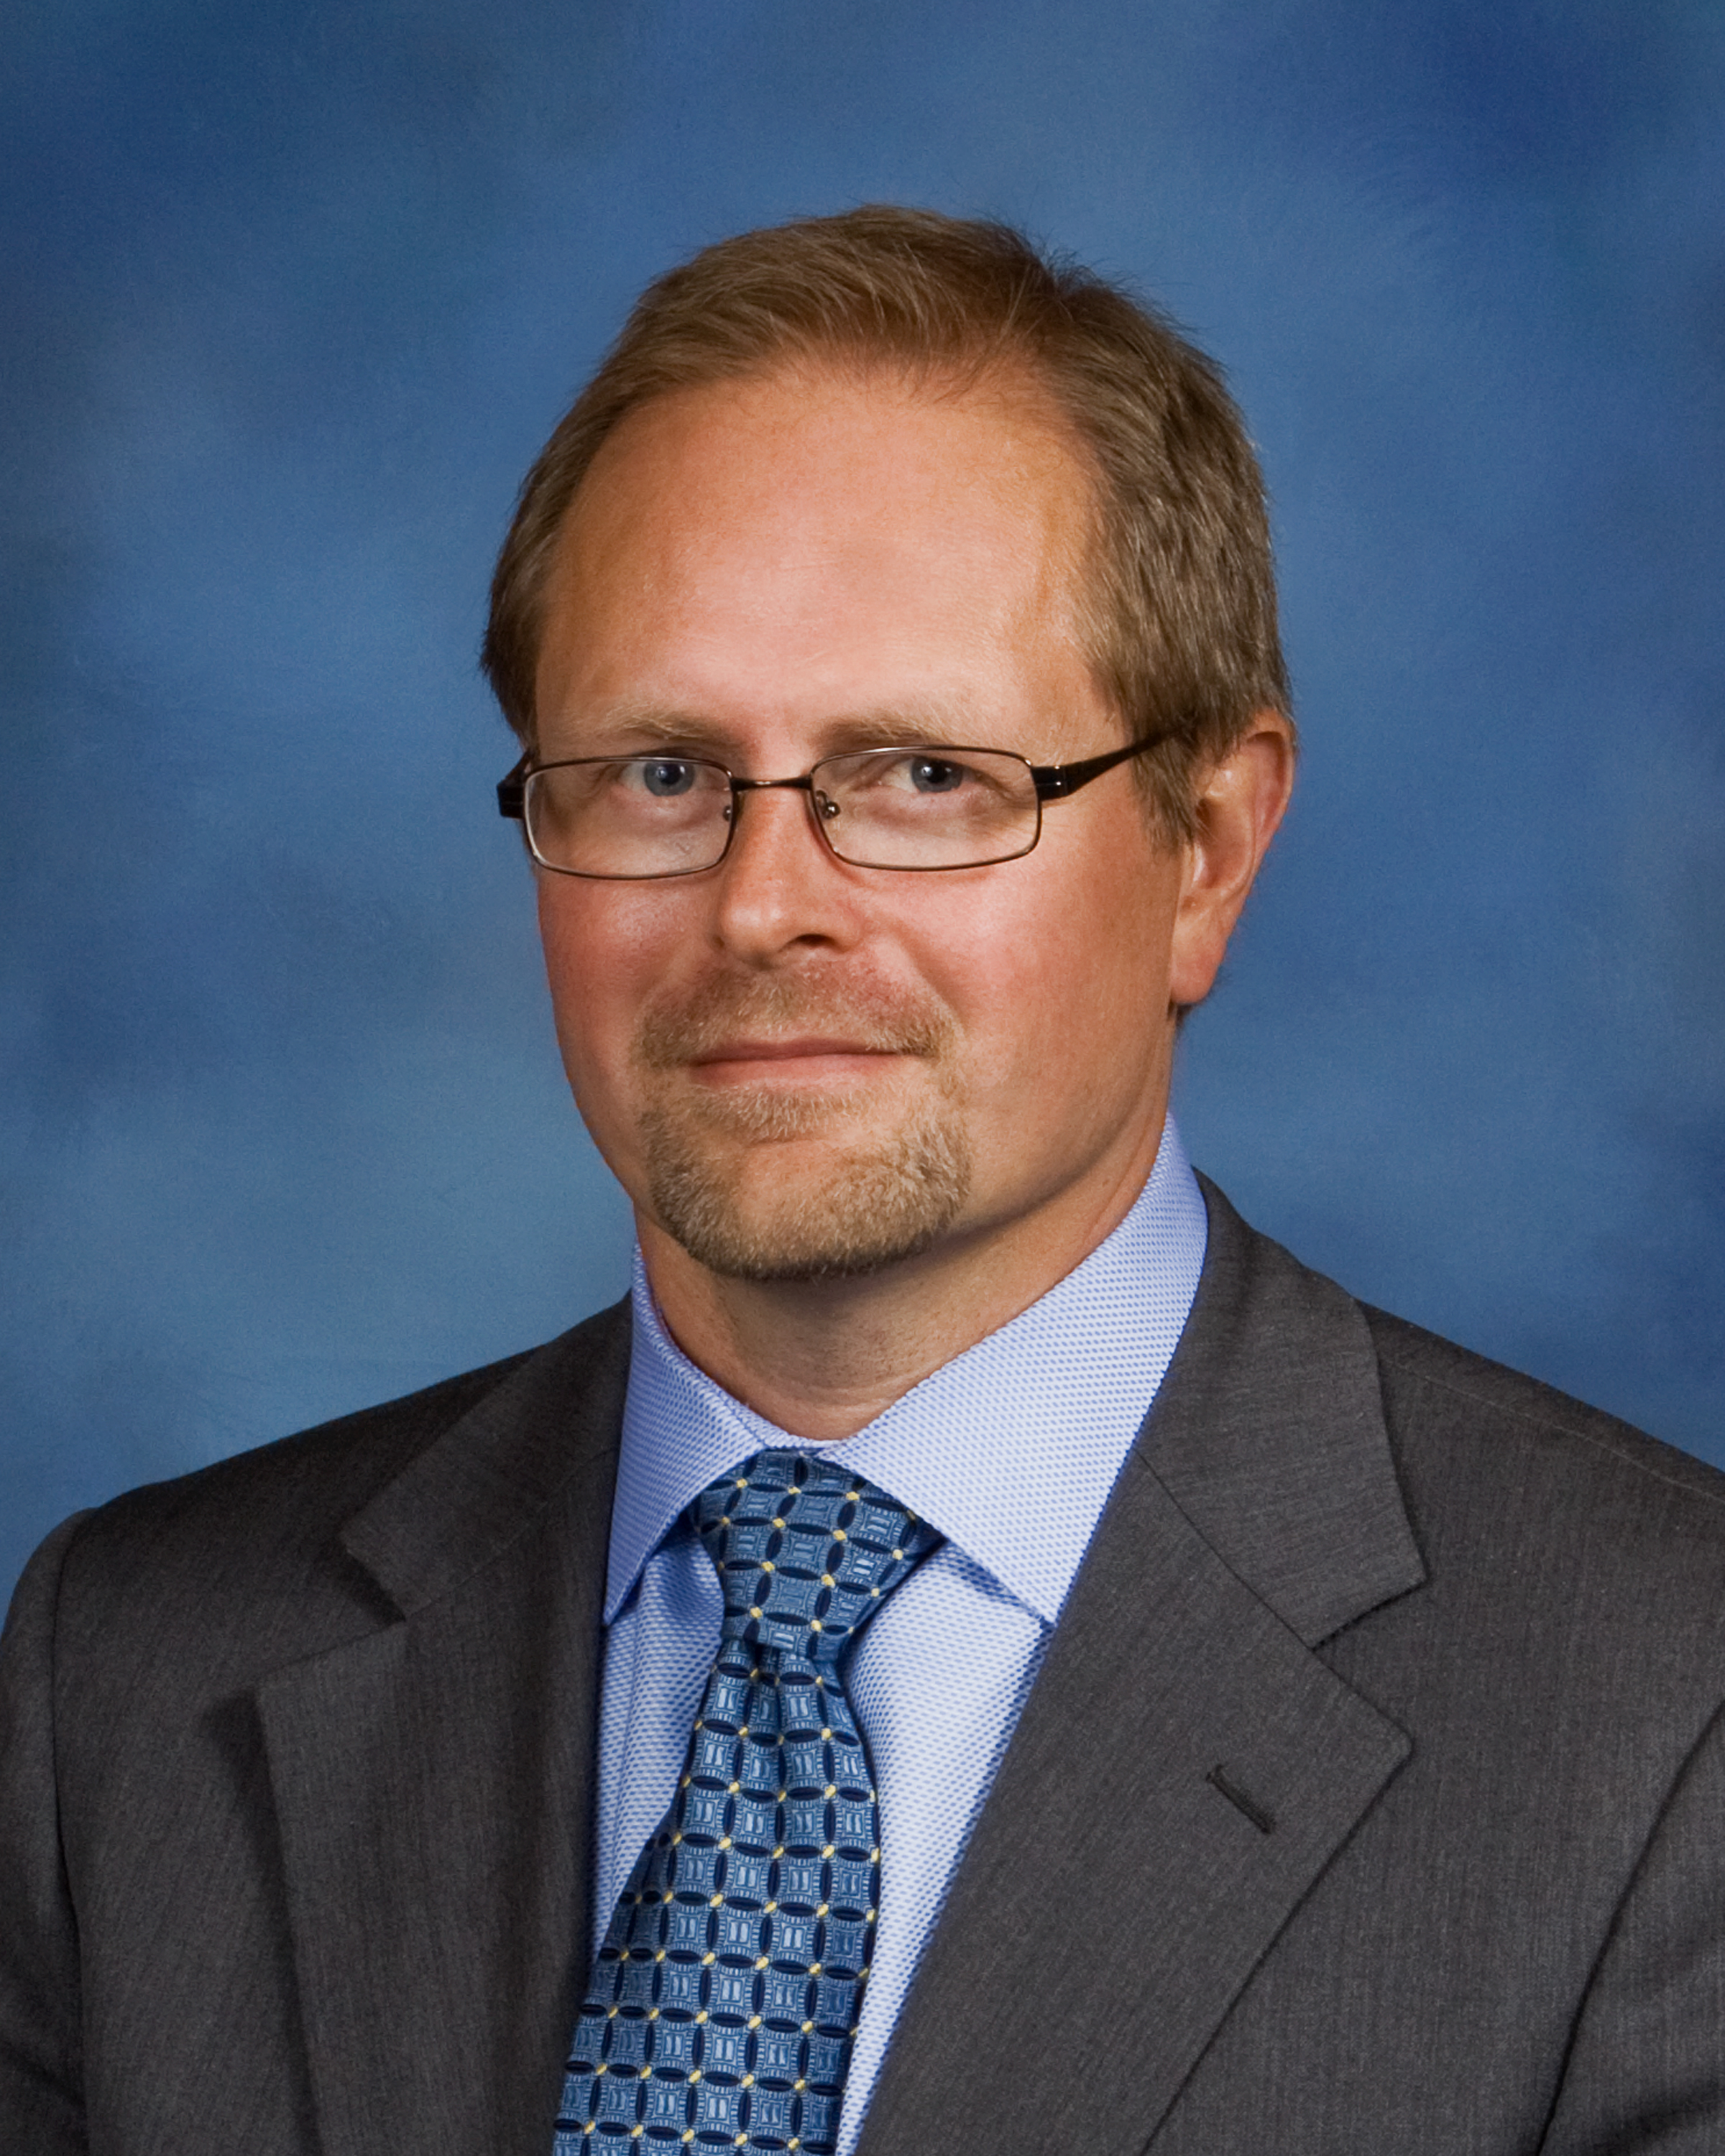  J. Paul Jacobson, MD, MPH, FACR, chair of Department of Radiology